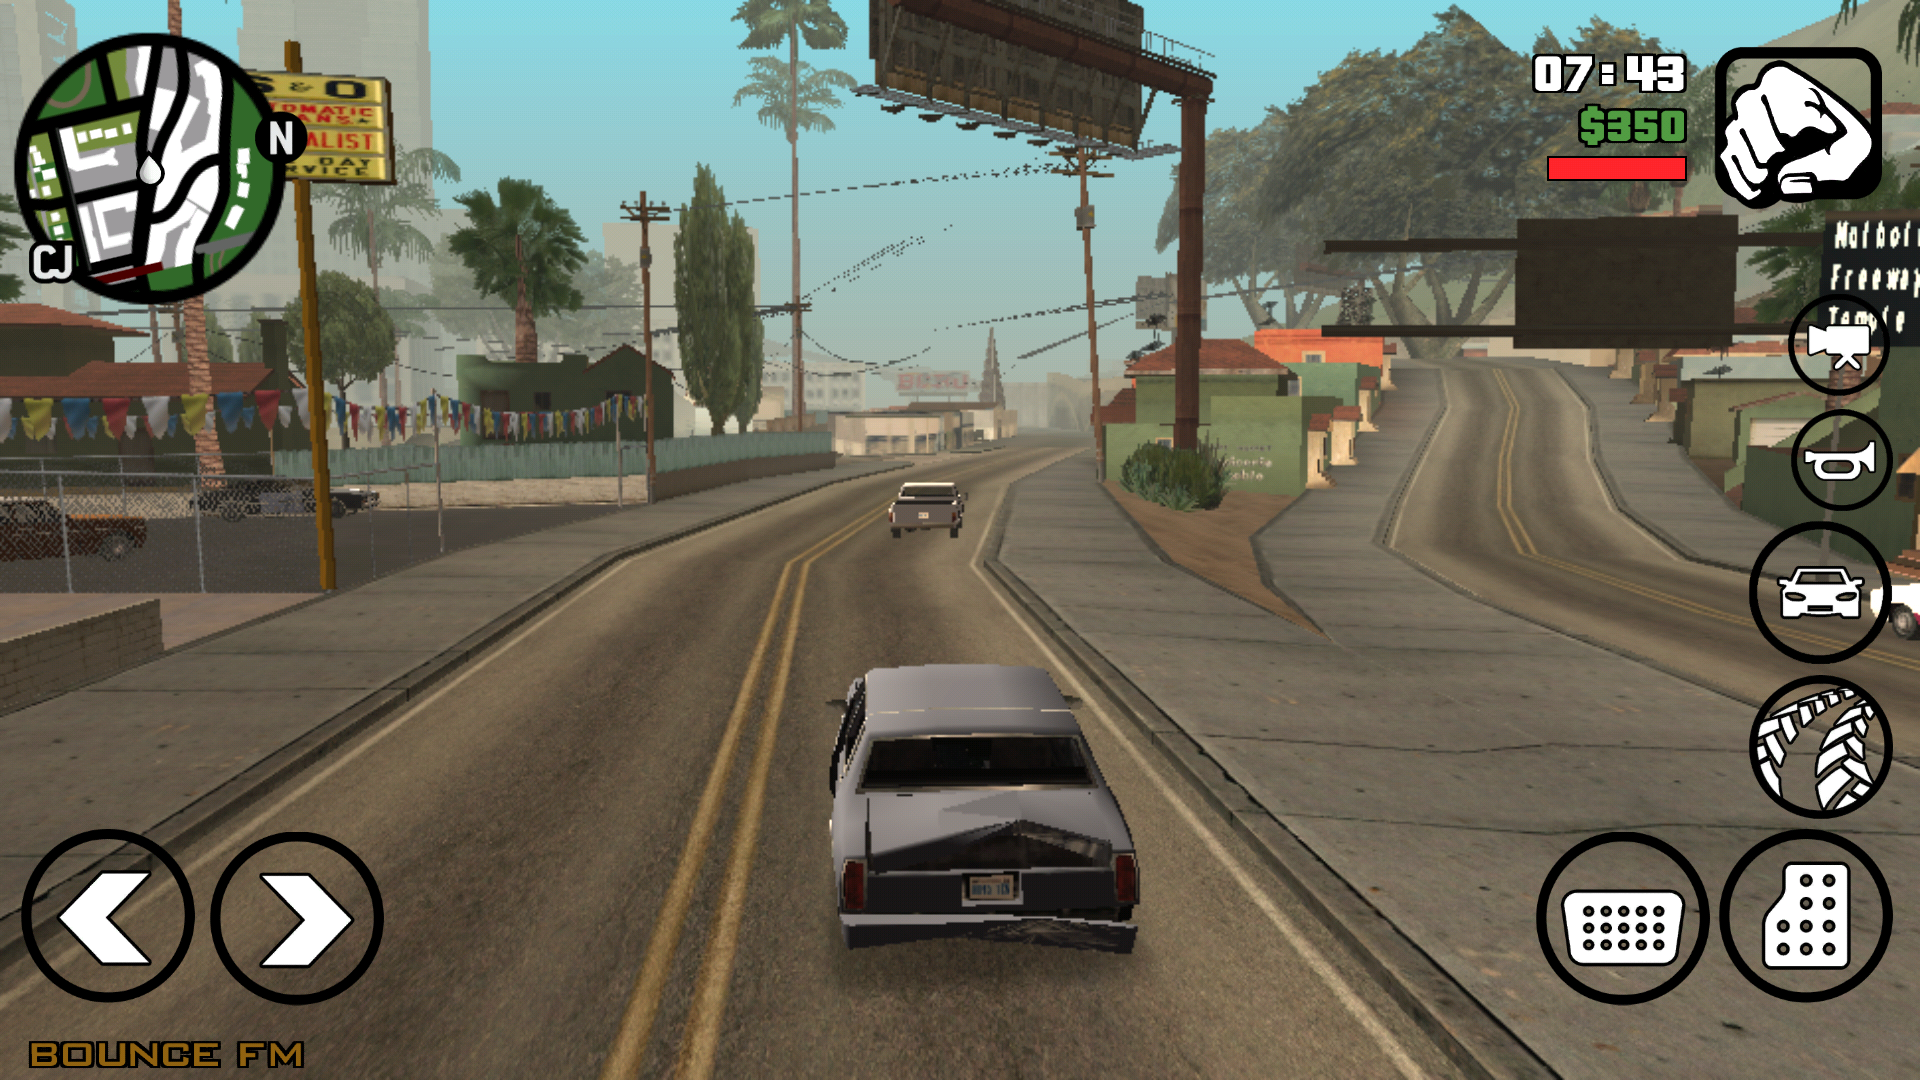 Grand Theft Auto San Andreas Android 18/20 (test, photos)